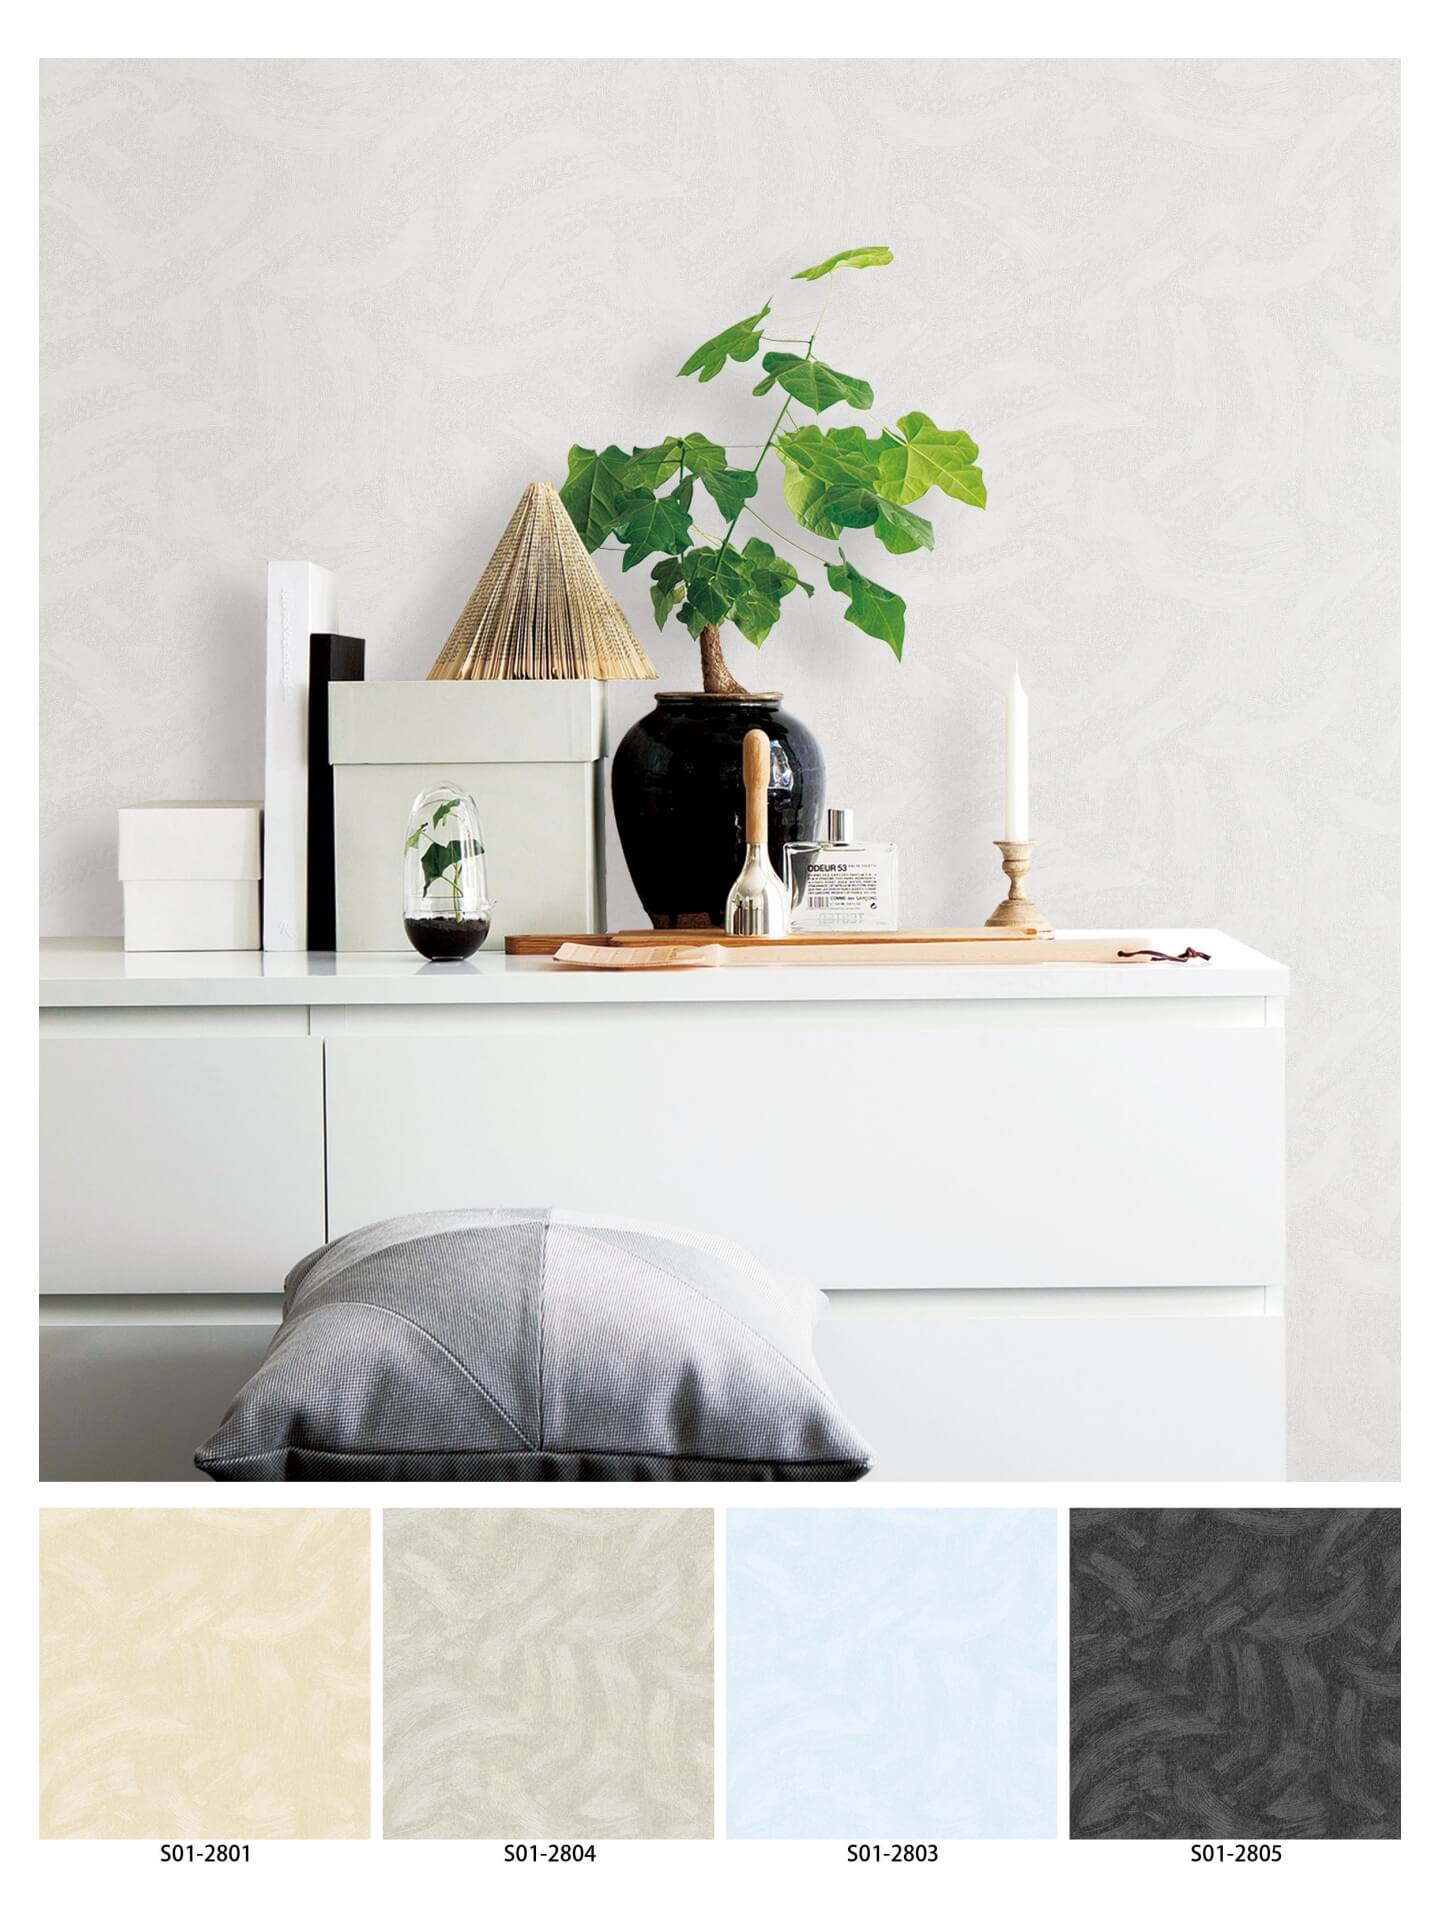 Floral Design Wallpapers Manufacture With High-Quality PVC Material Designer Premium Quality Water-resistant Wallpaper (5)